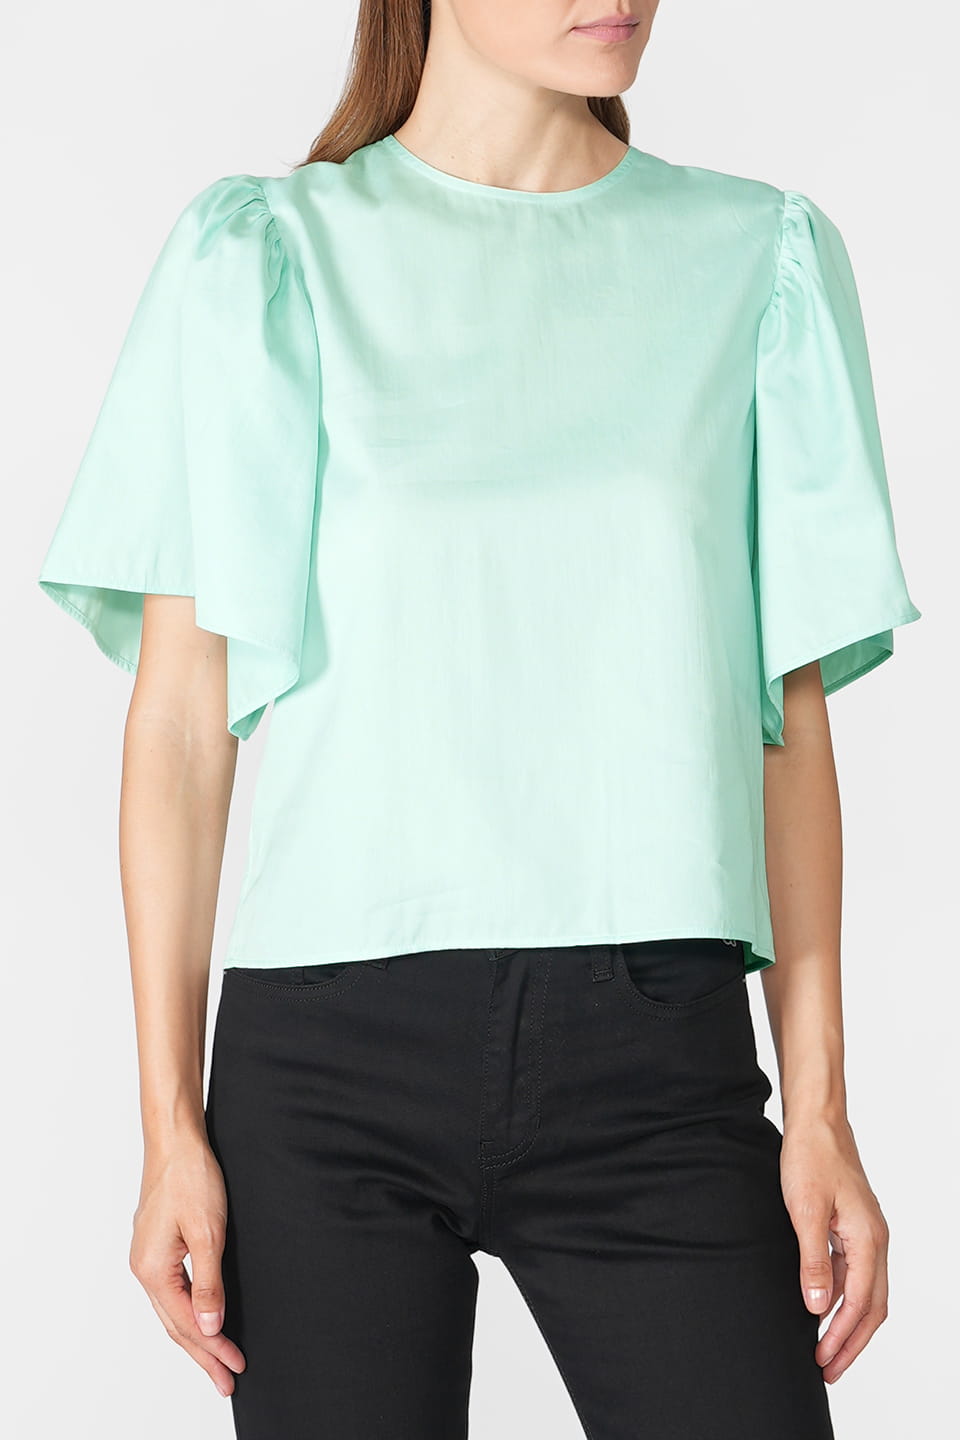 Shop online trendy Green Women short sleeve from Federica Tosi Fashion designer. Product gallery 1